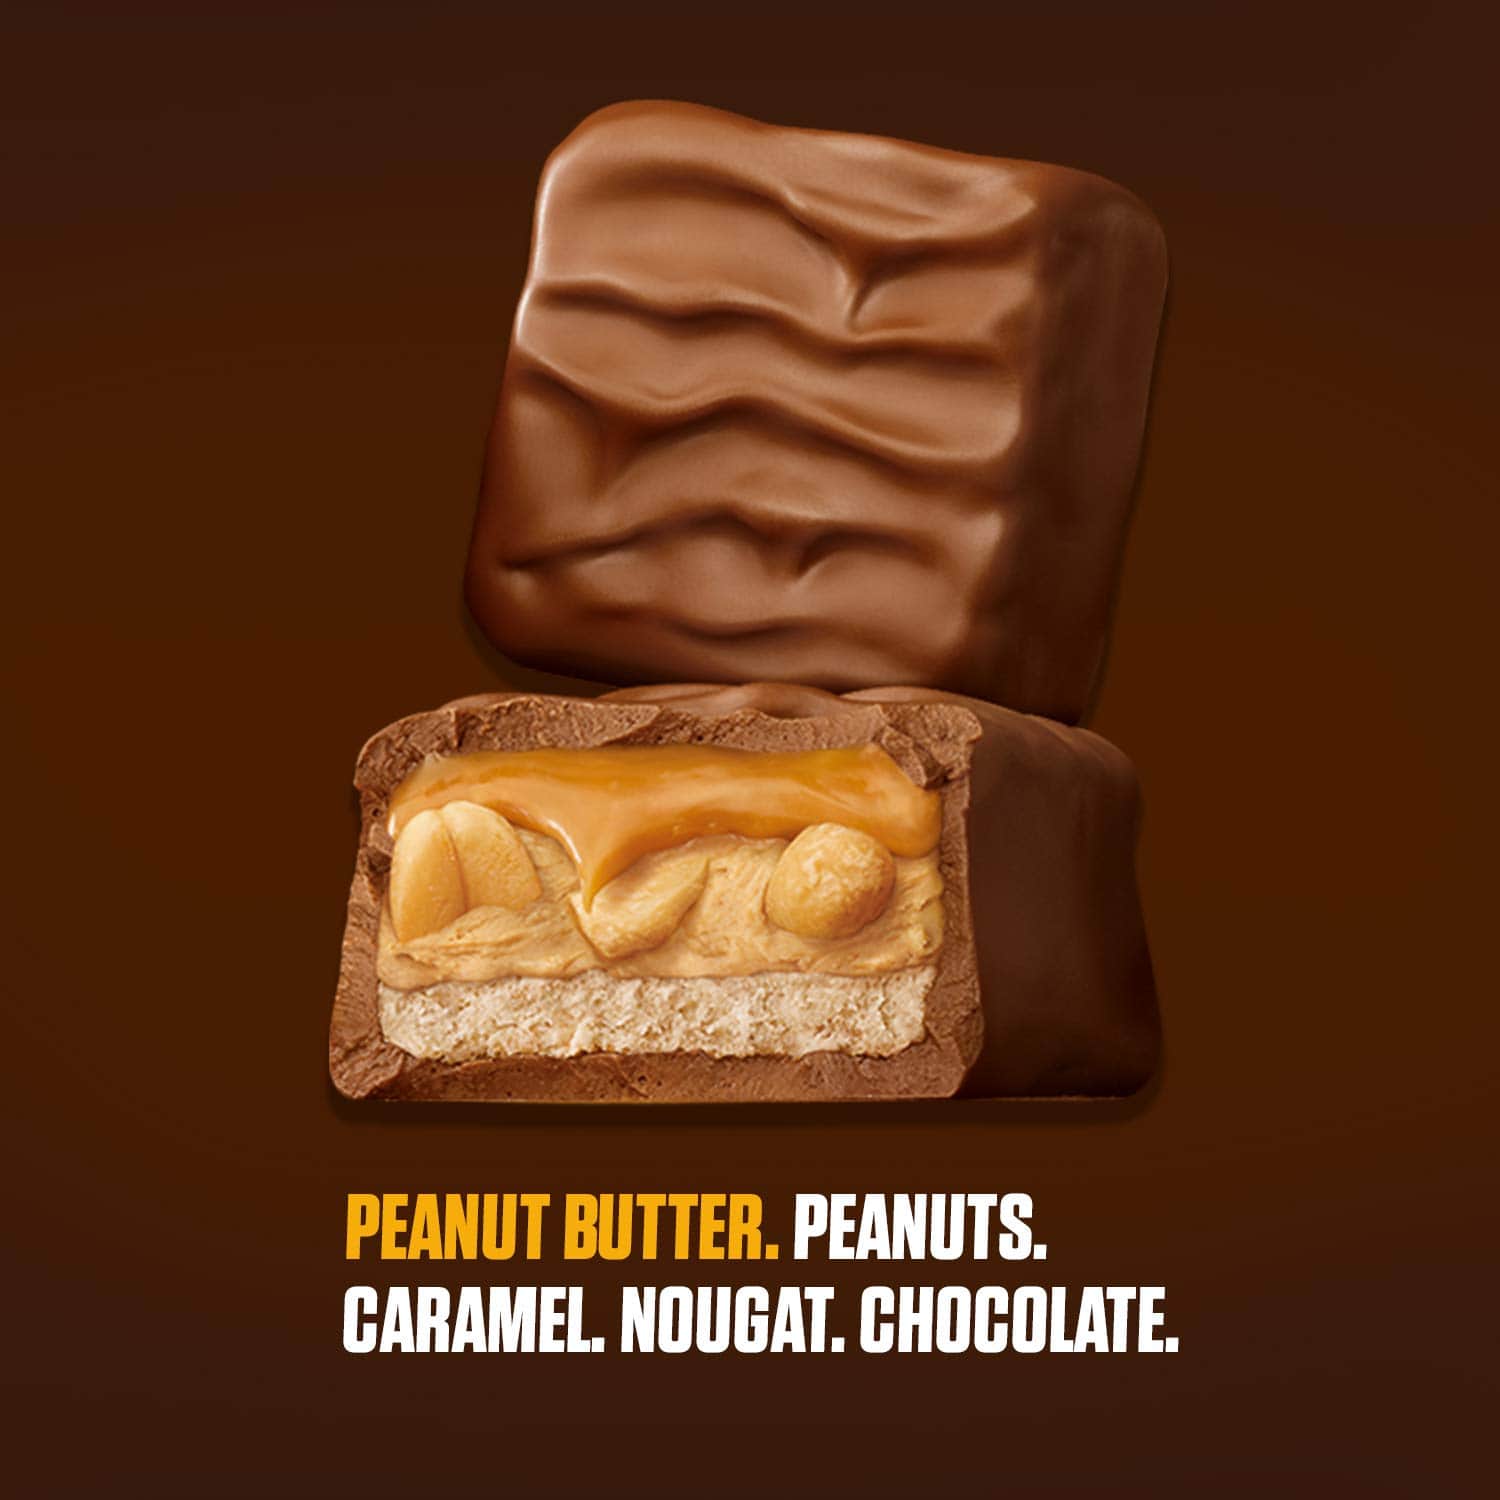 Snickers Peanut Butter USA Version